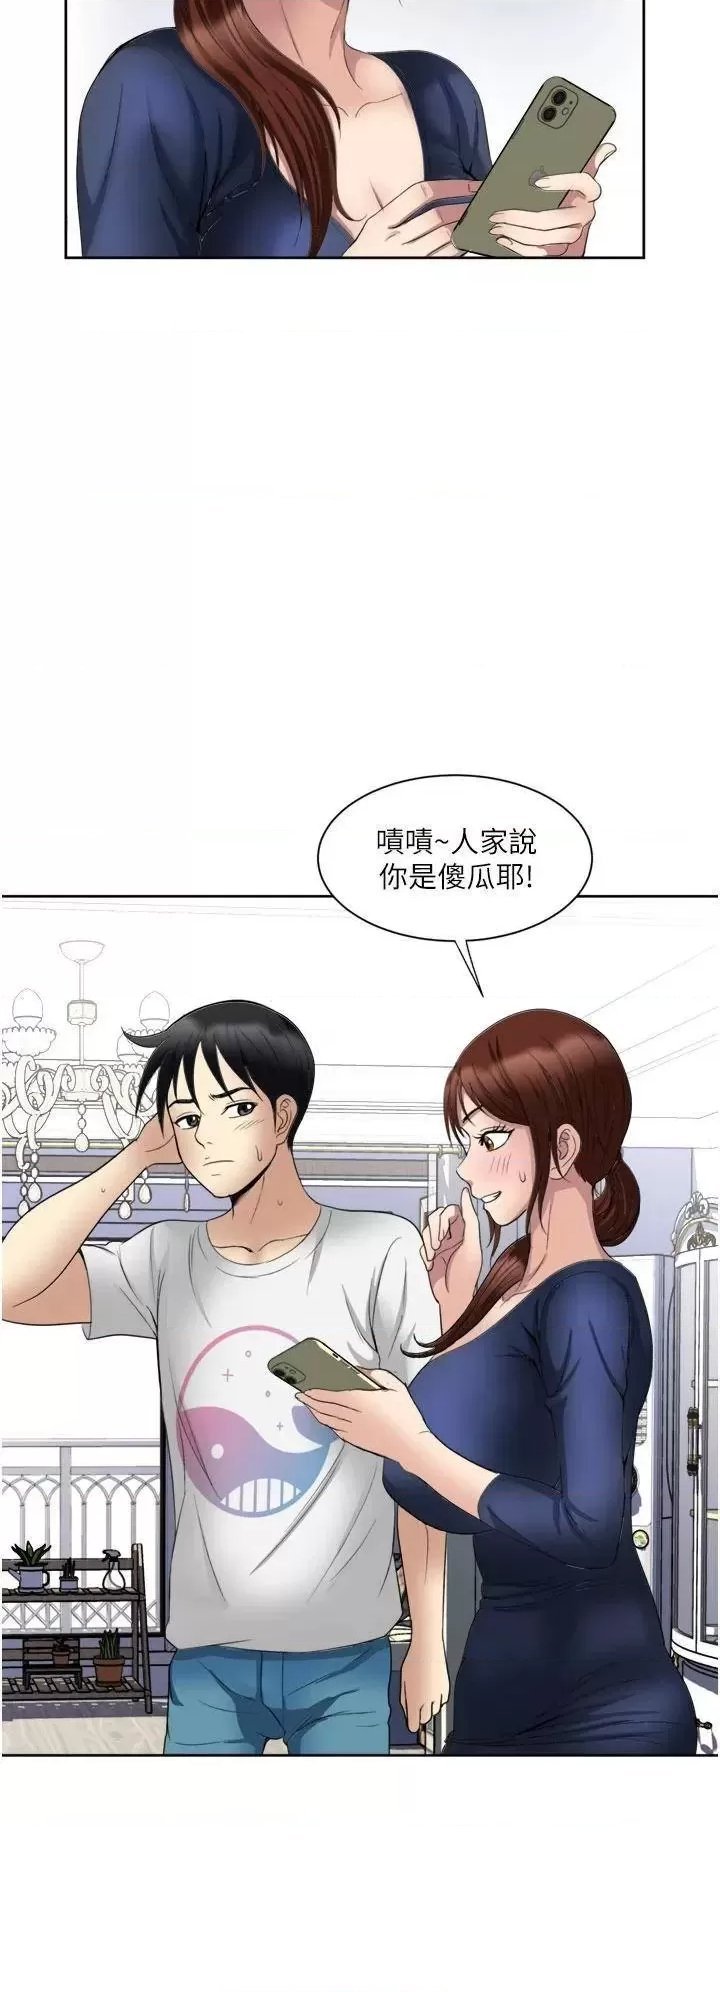 just-once-raw-chap-23-27